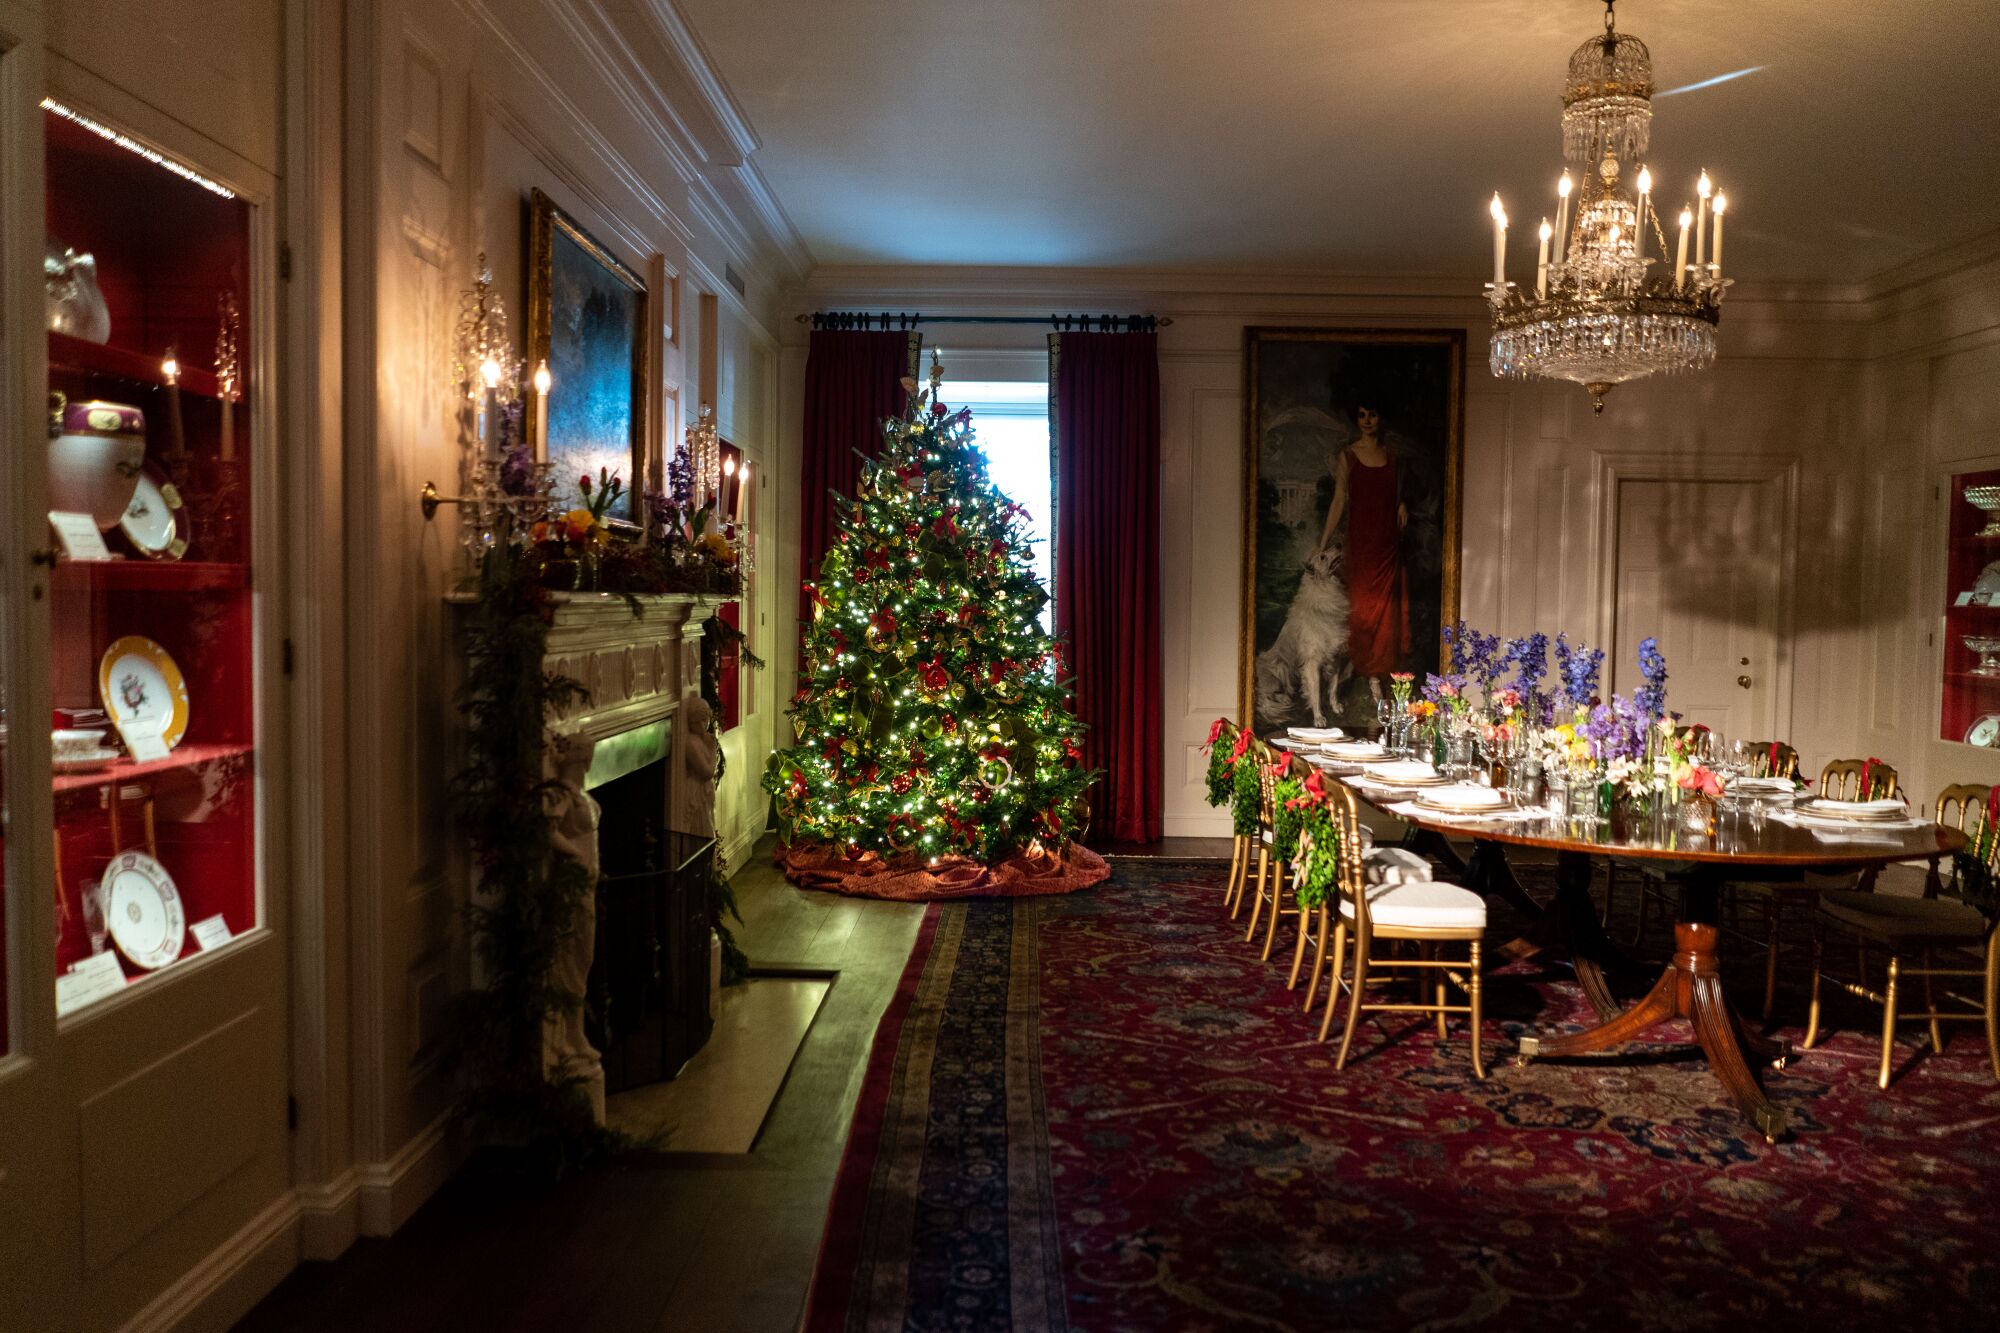 Christmas decorations can be seen throughout the China Room.